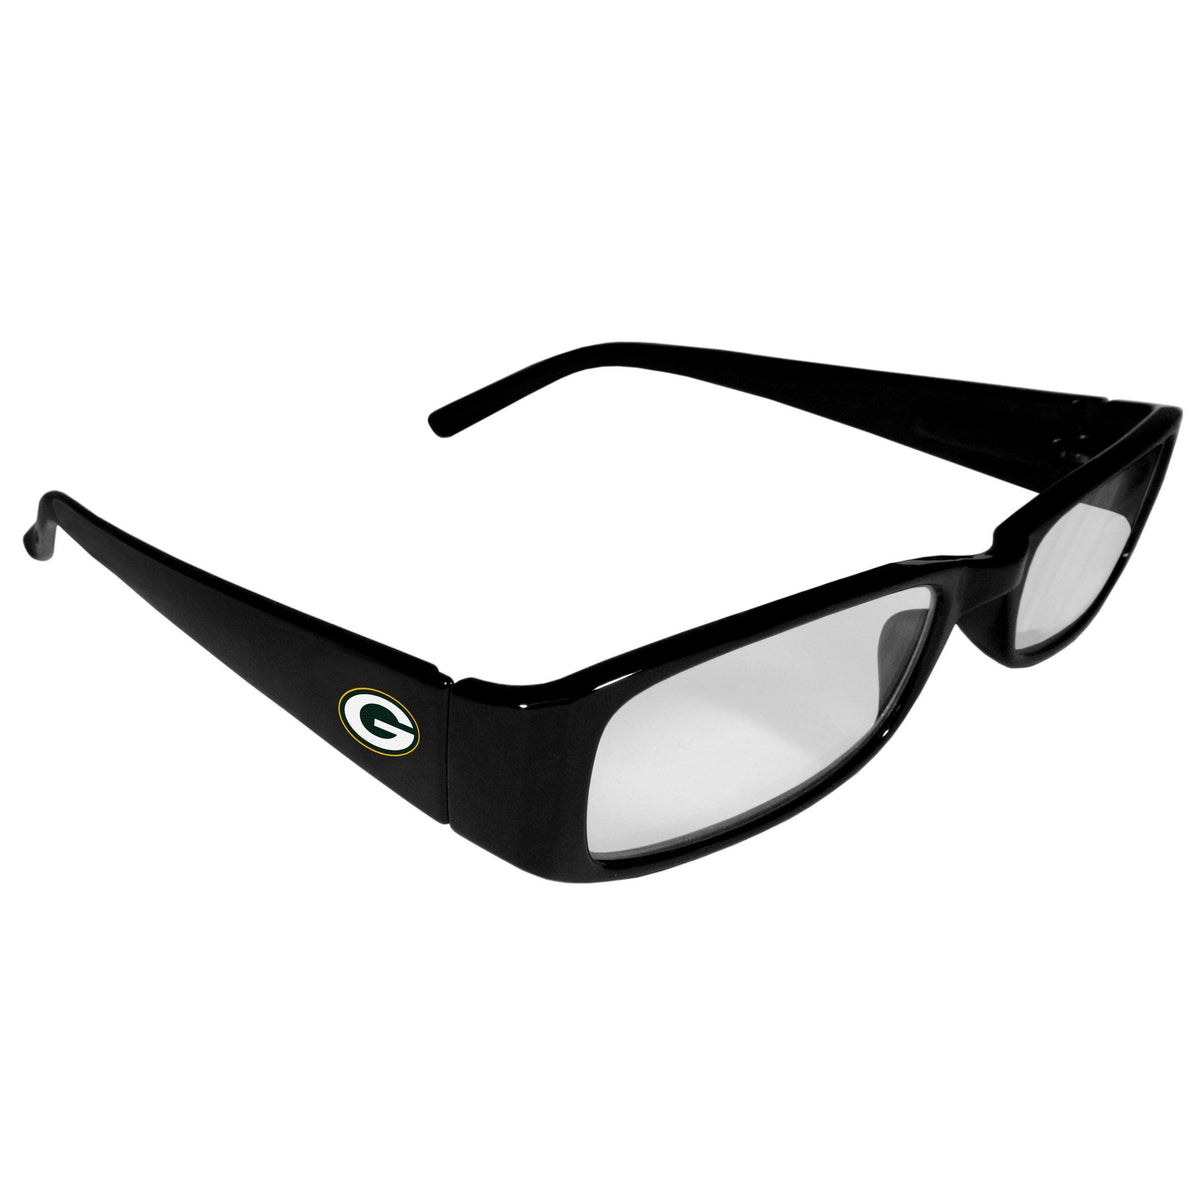 Green Bay Packers Printed Reading Glasses, +2.00 - Flyclothing LLC